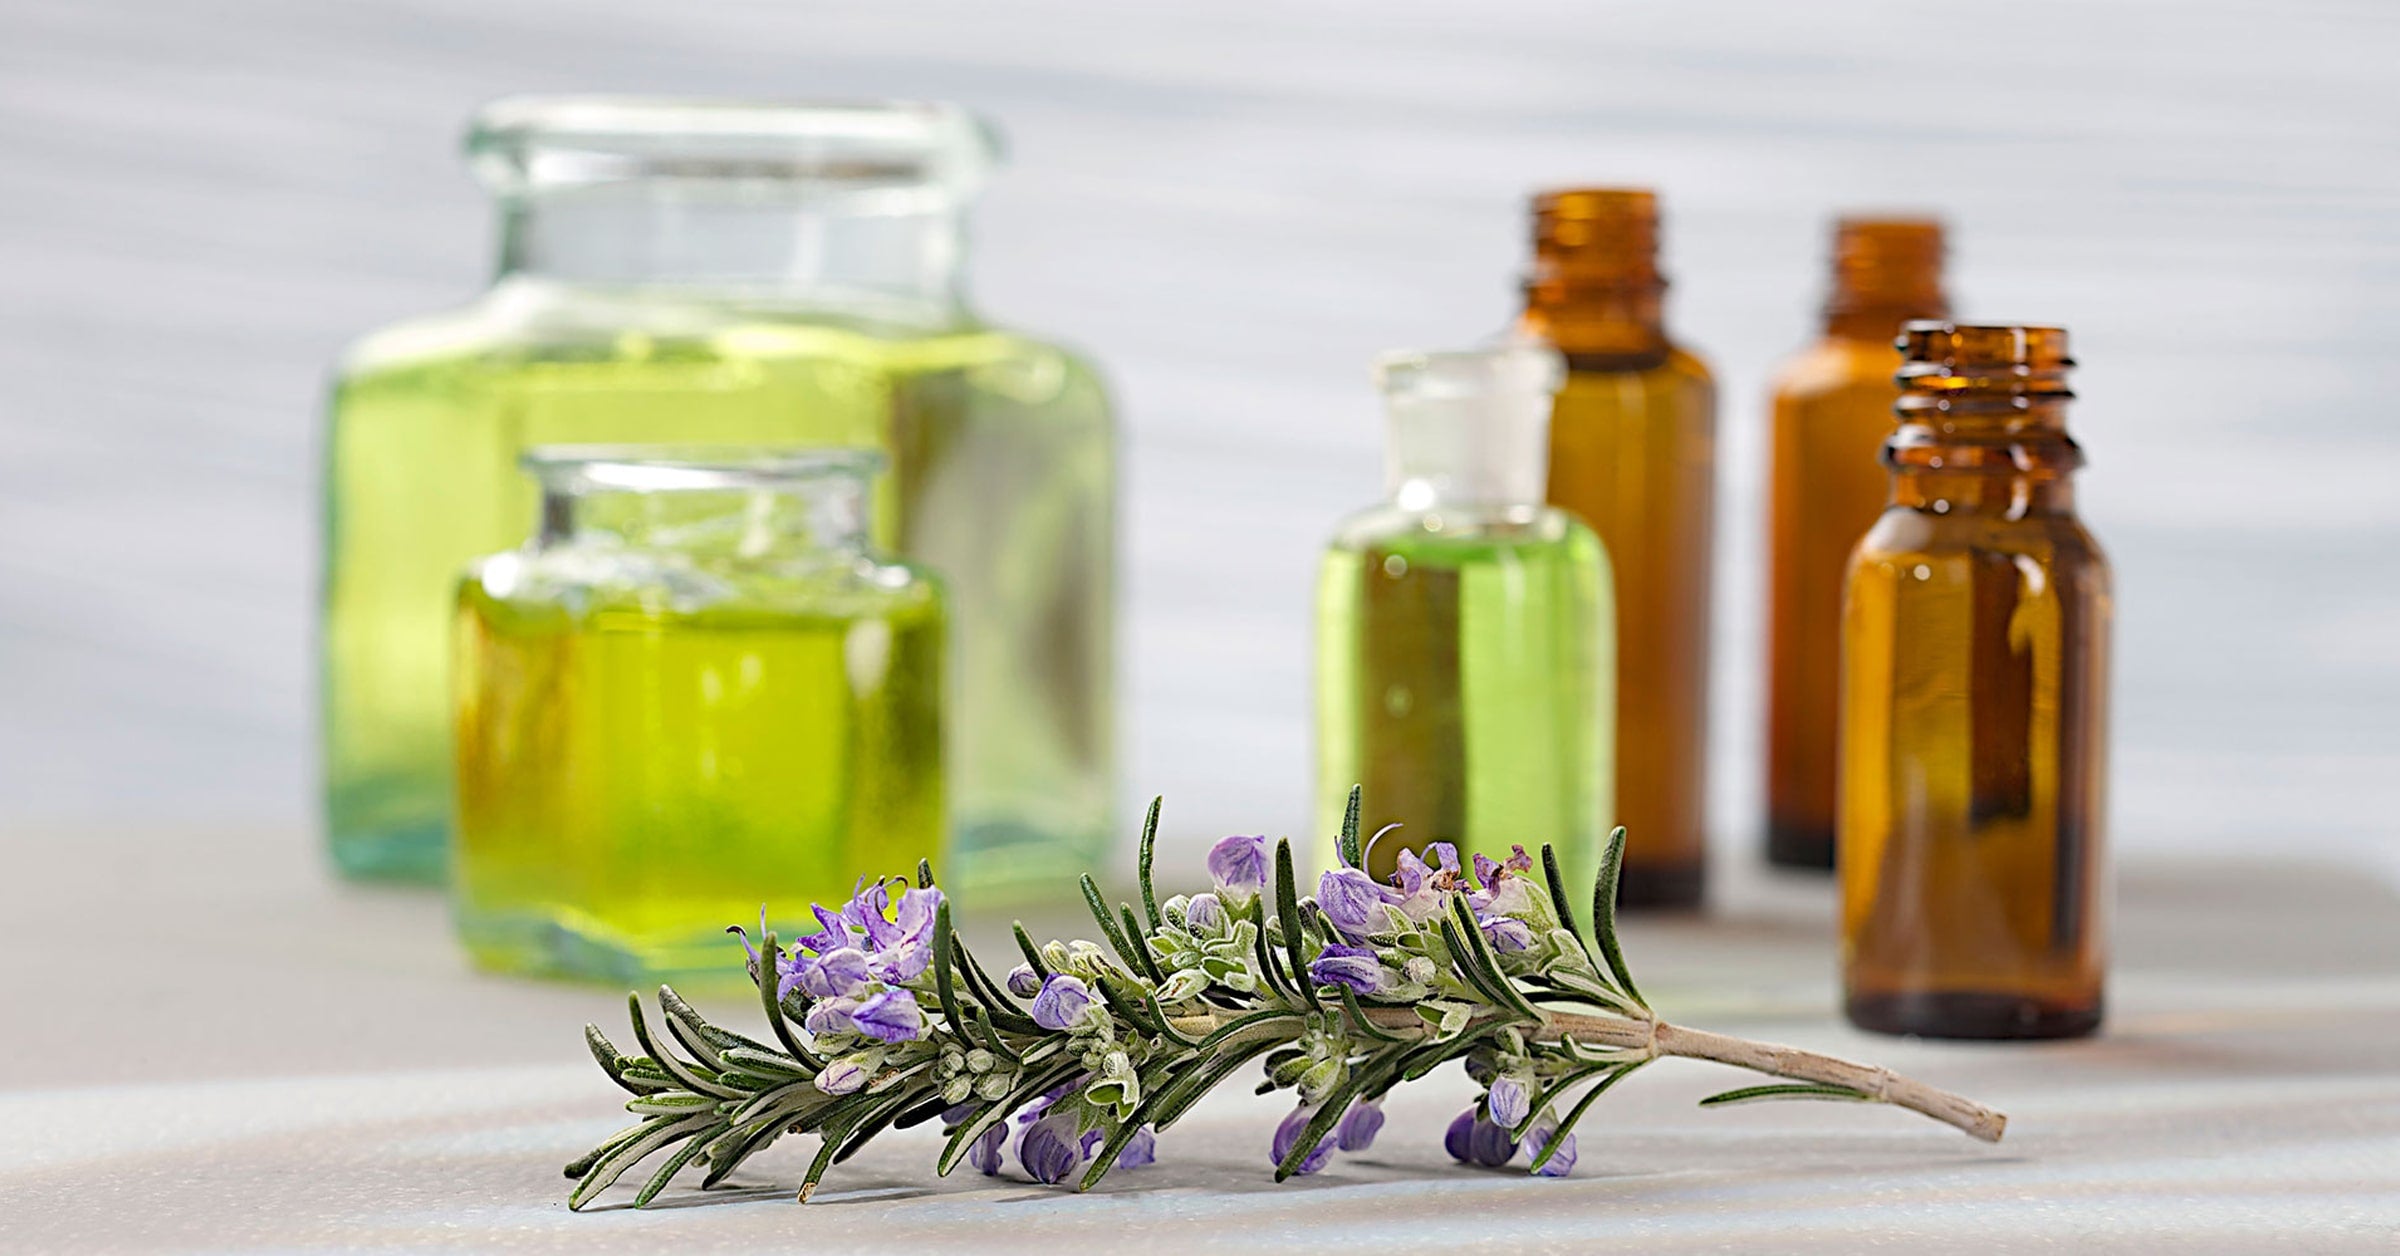 Create Your Own Fragrance with Essential Oils